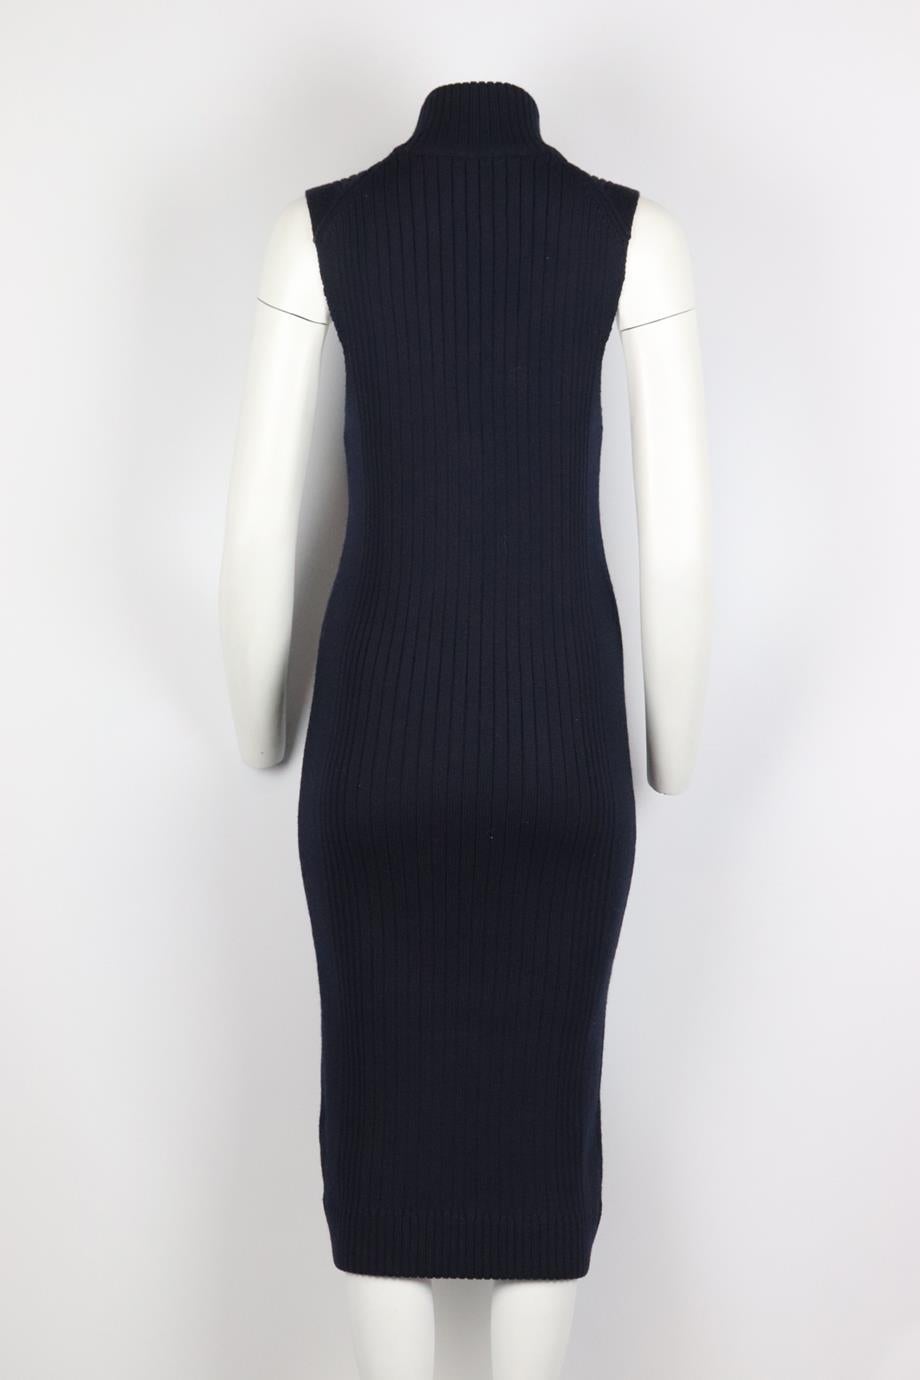 Acne Studios Ribbed Wool Midi Dress Xsmall In Excellent Condition In London, GB